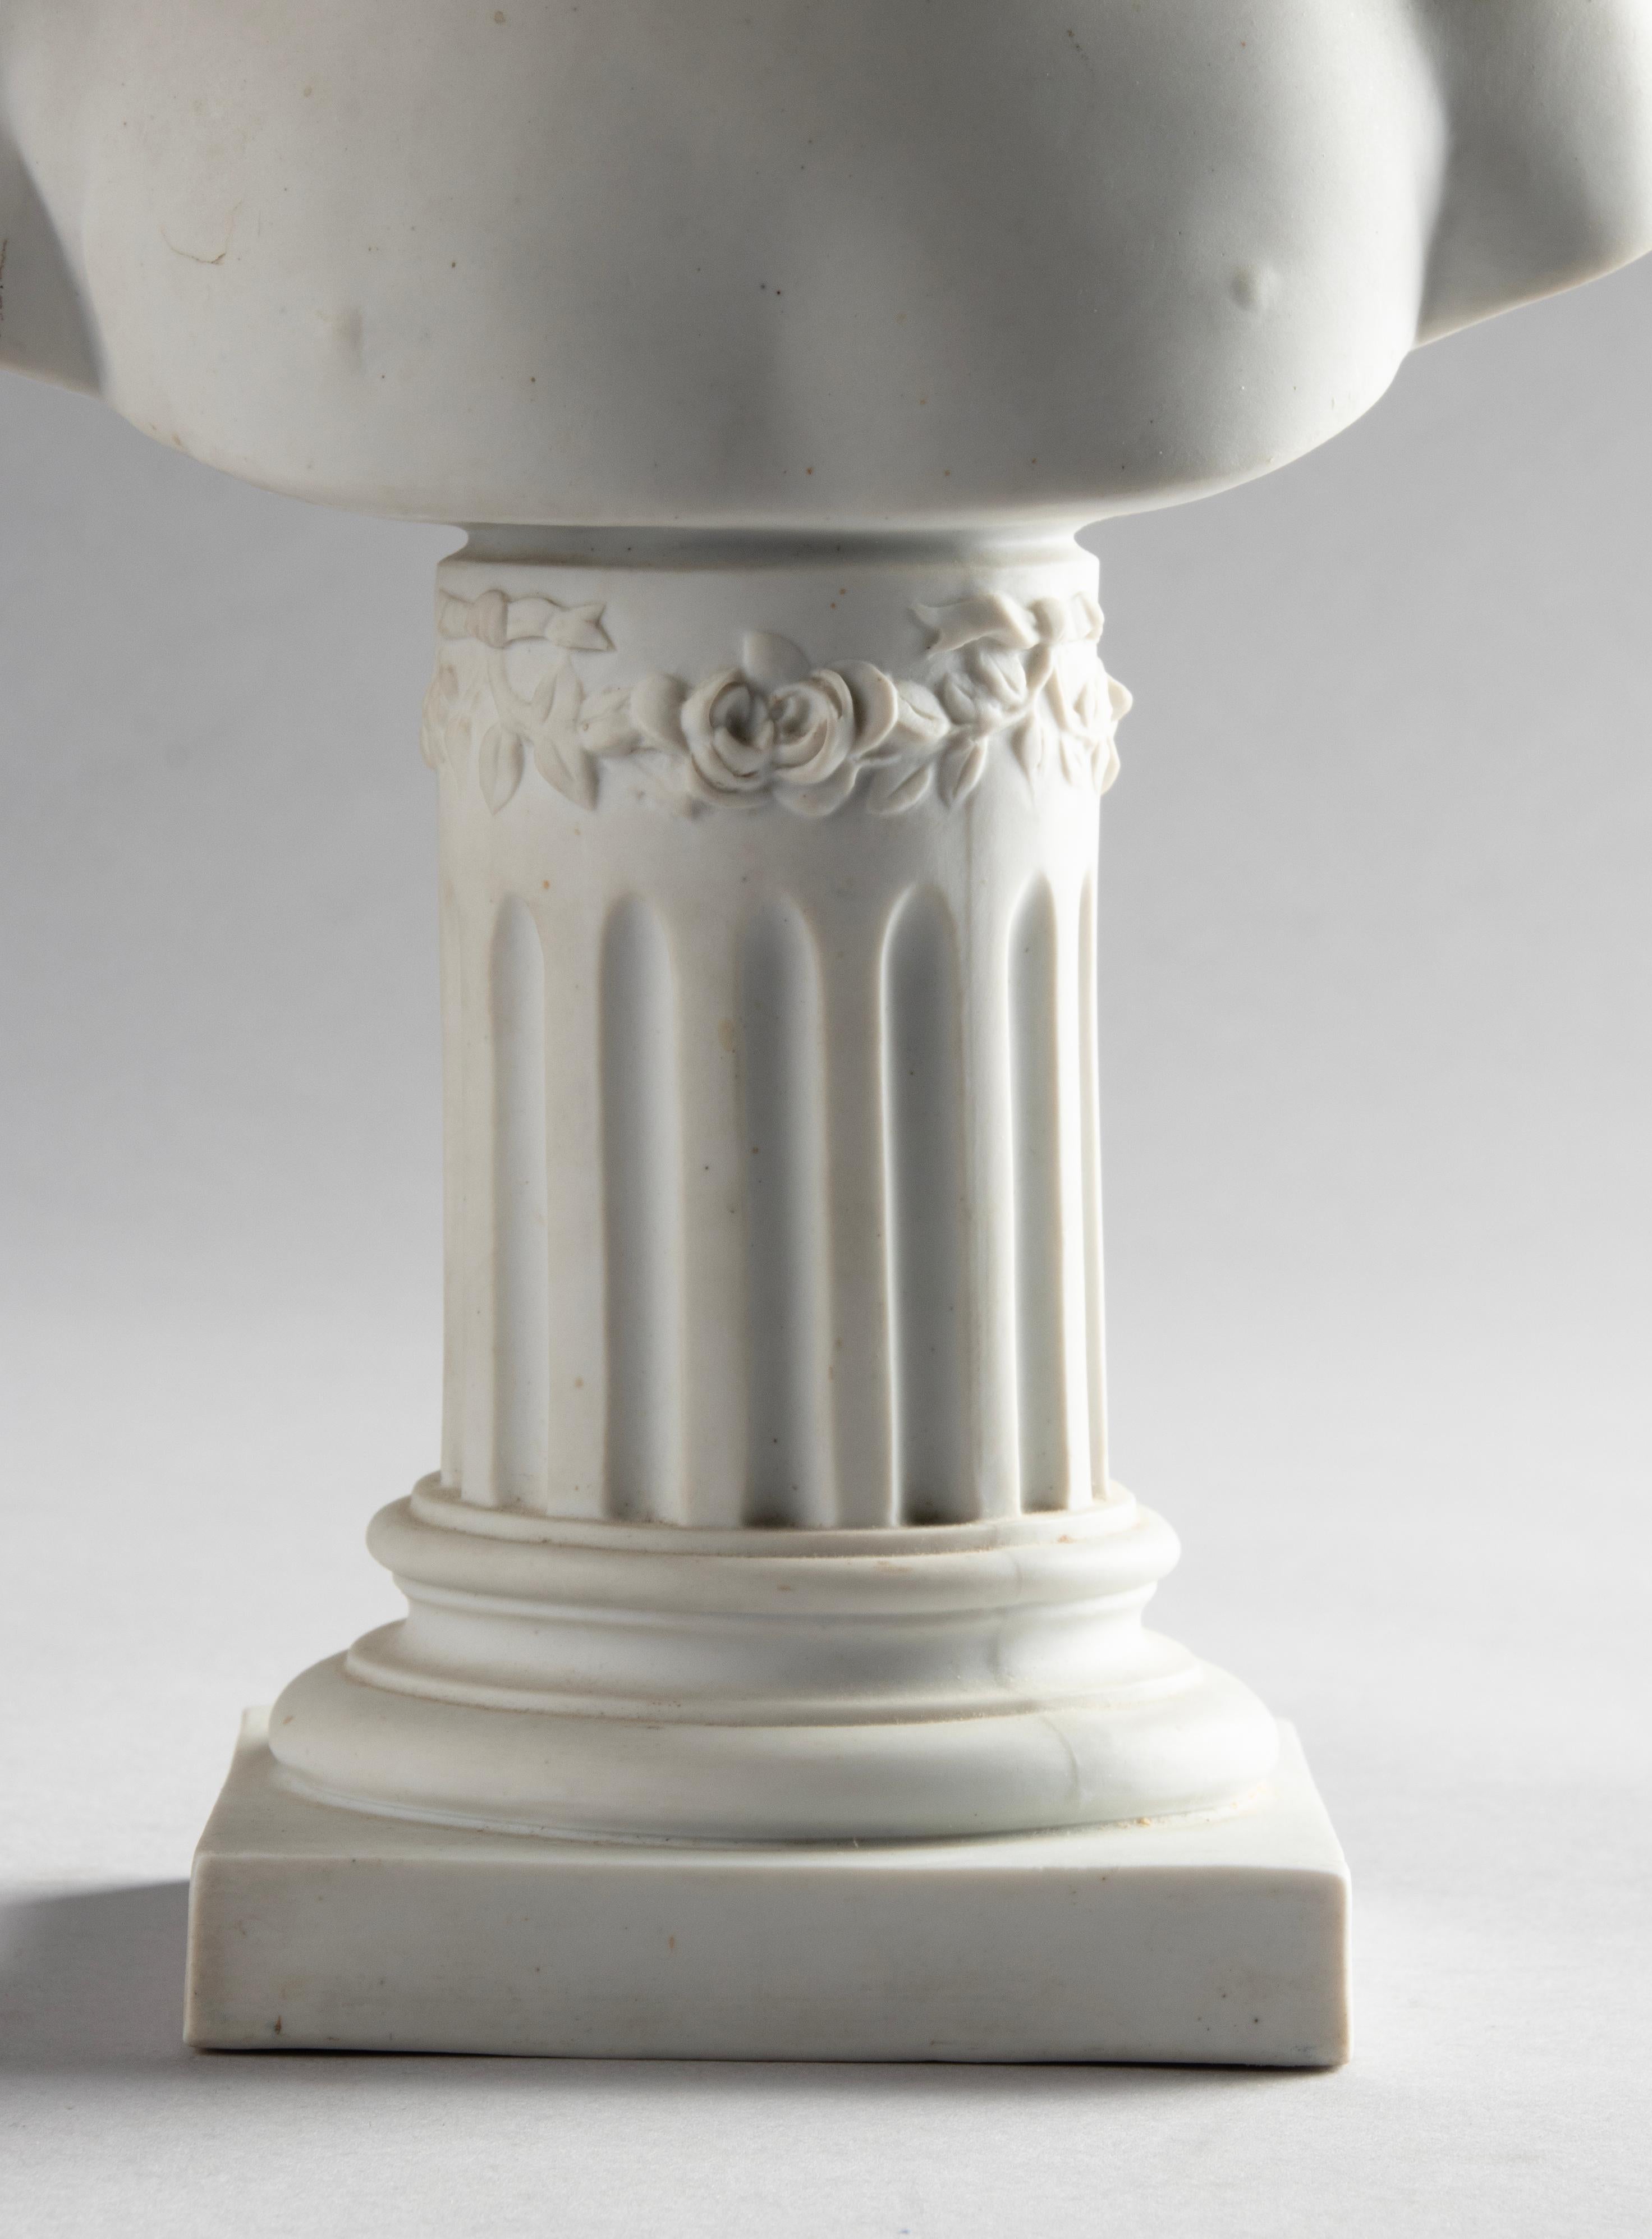 Belle Époque Early 19th Century Biscuit Bust of Louise Brongniart After Houdon Made by Sèvres For Sale